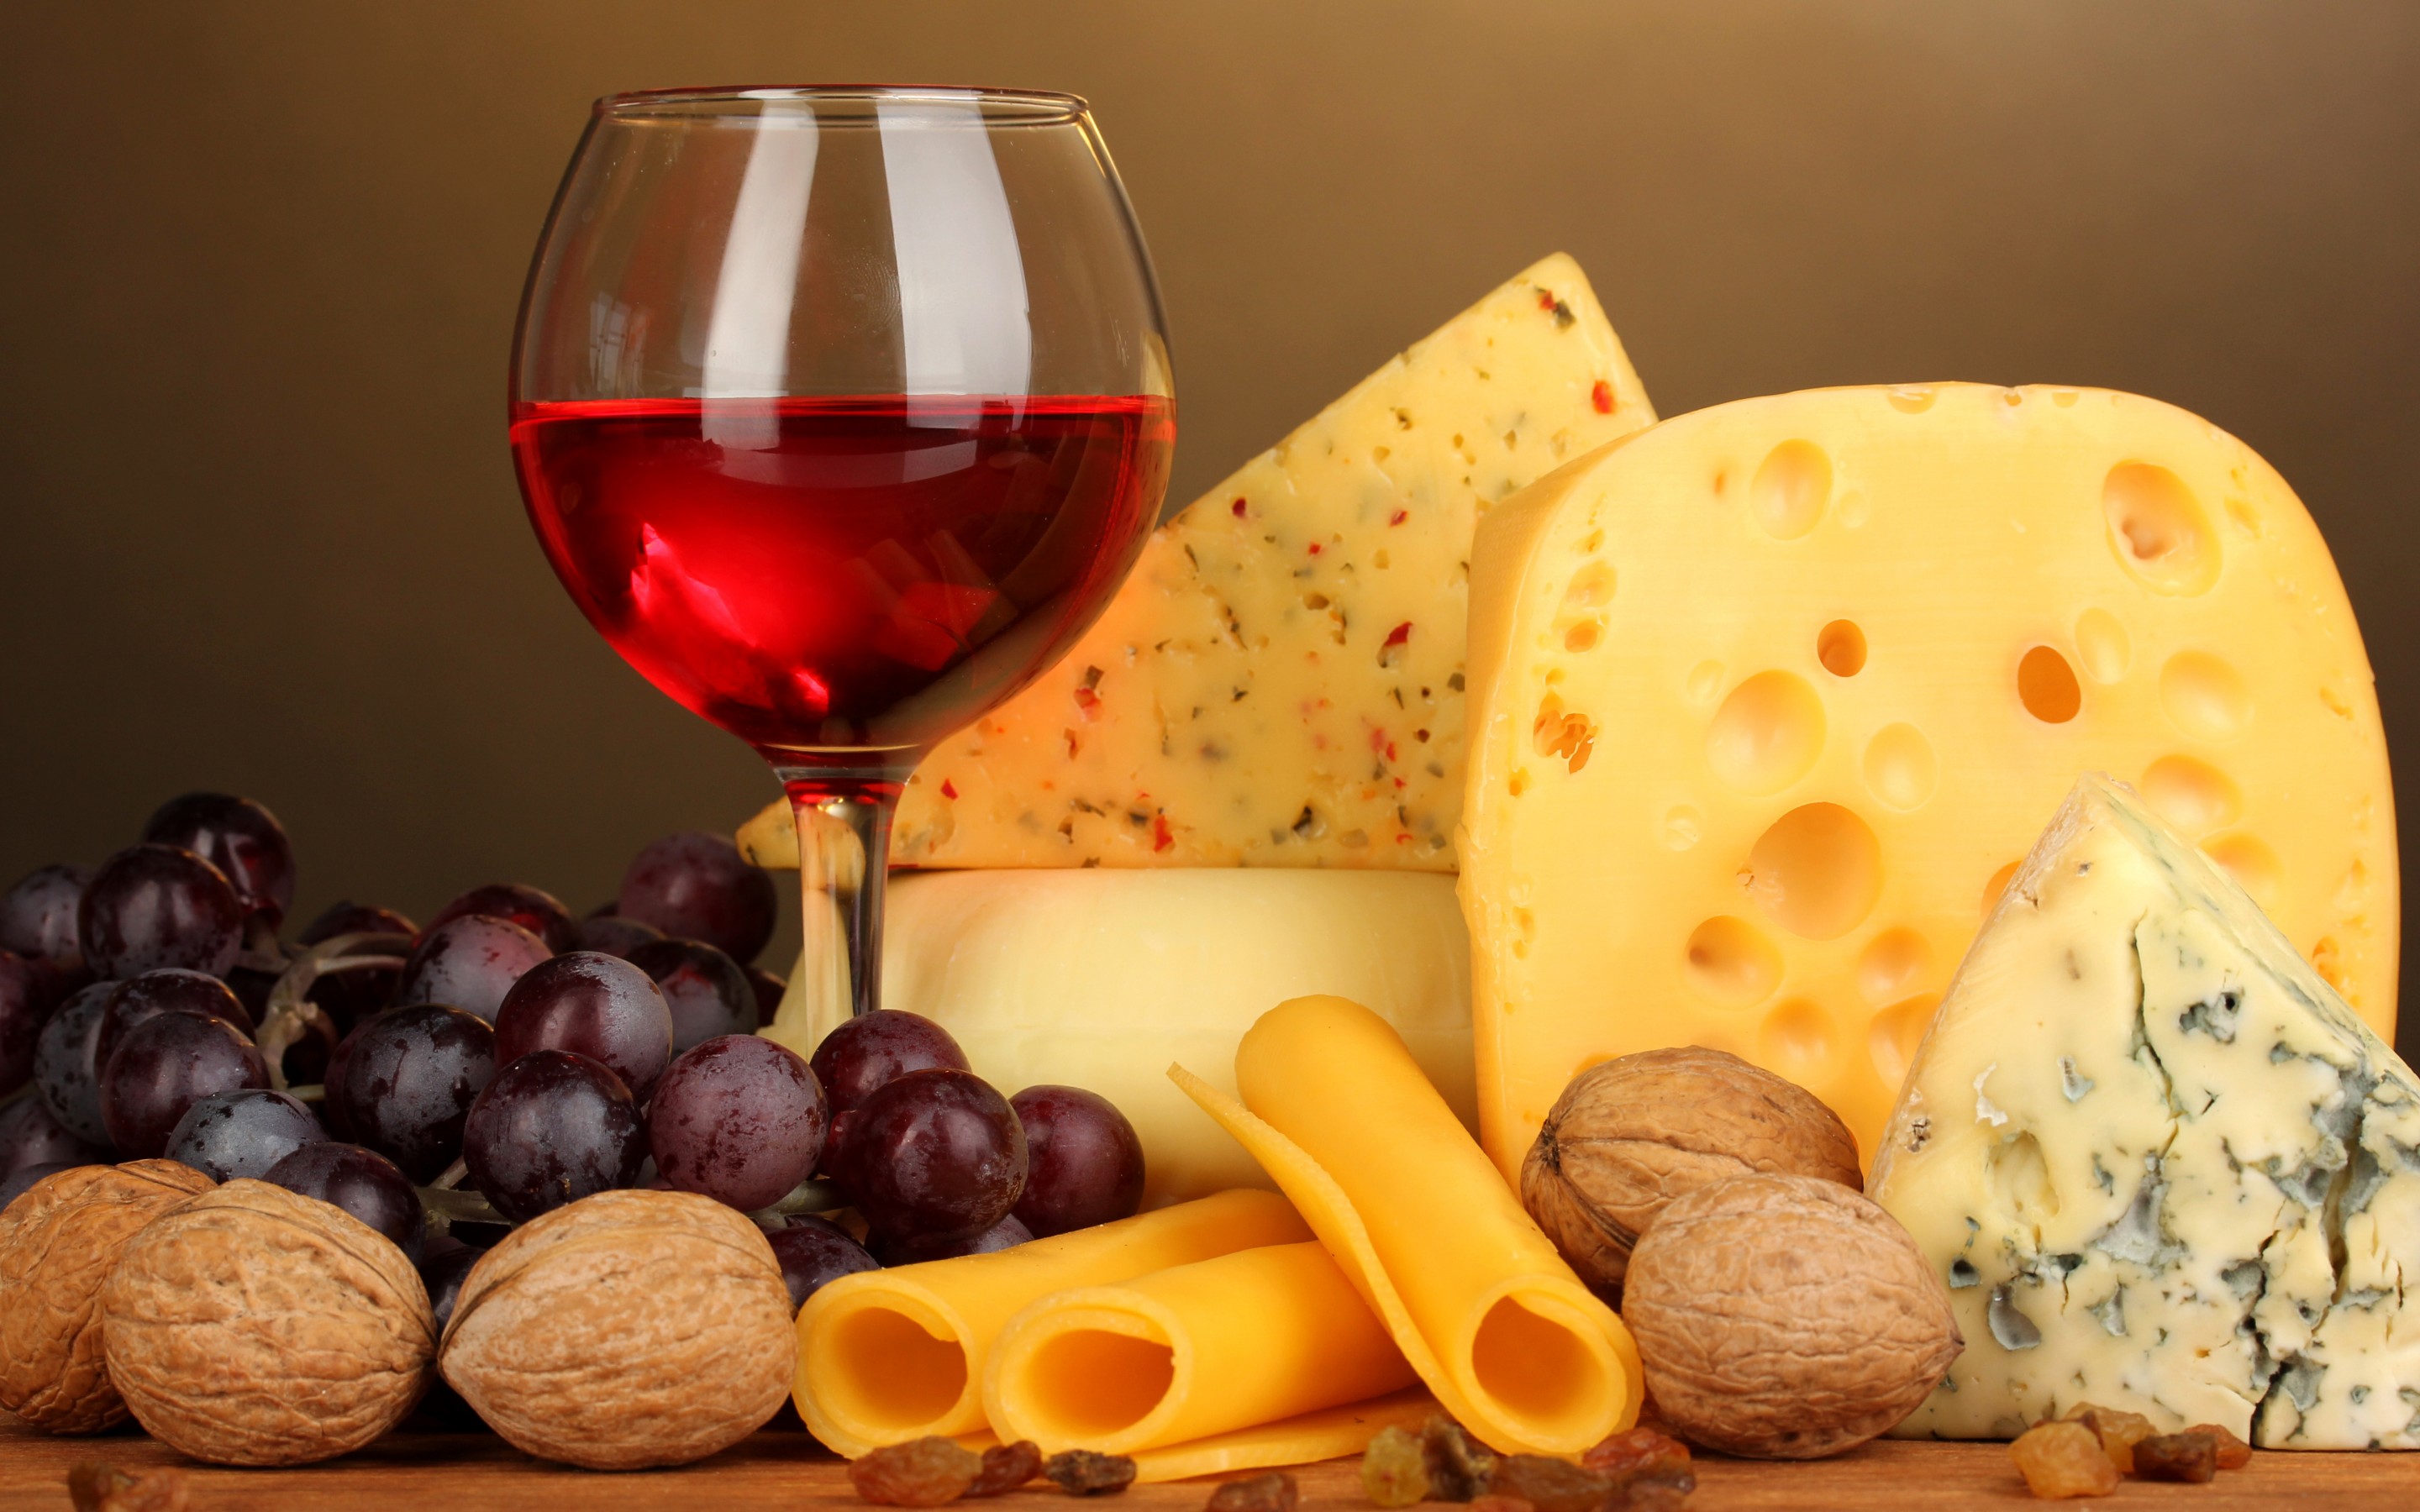 grapes, cheese, food, still life, nut, wine